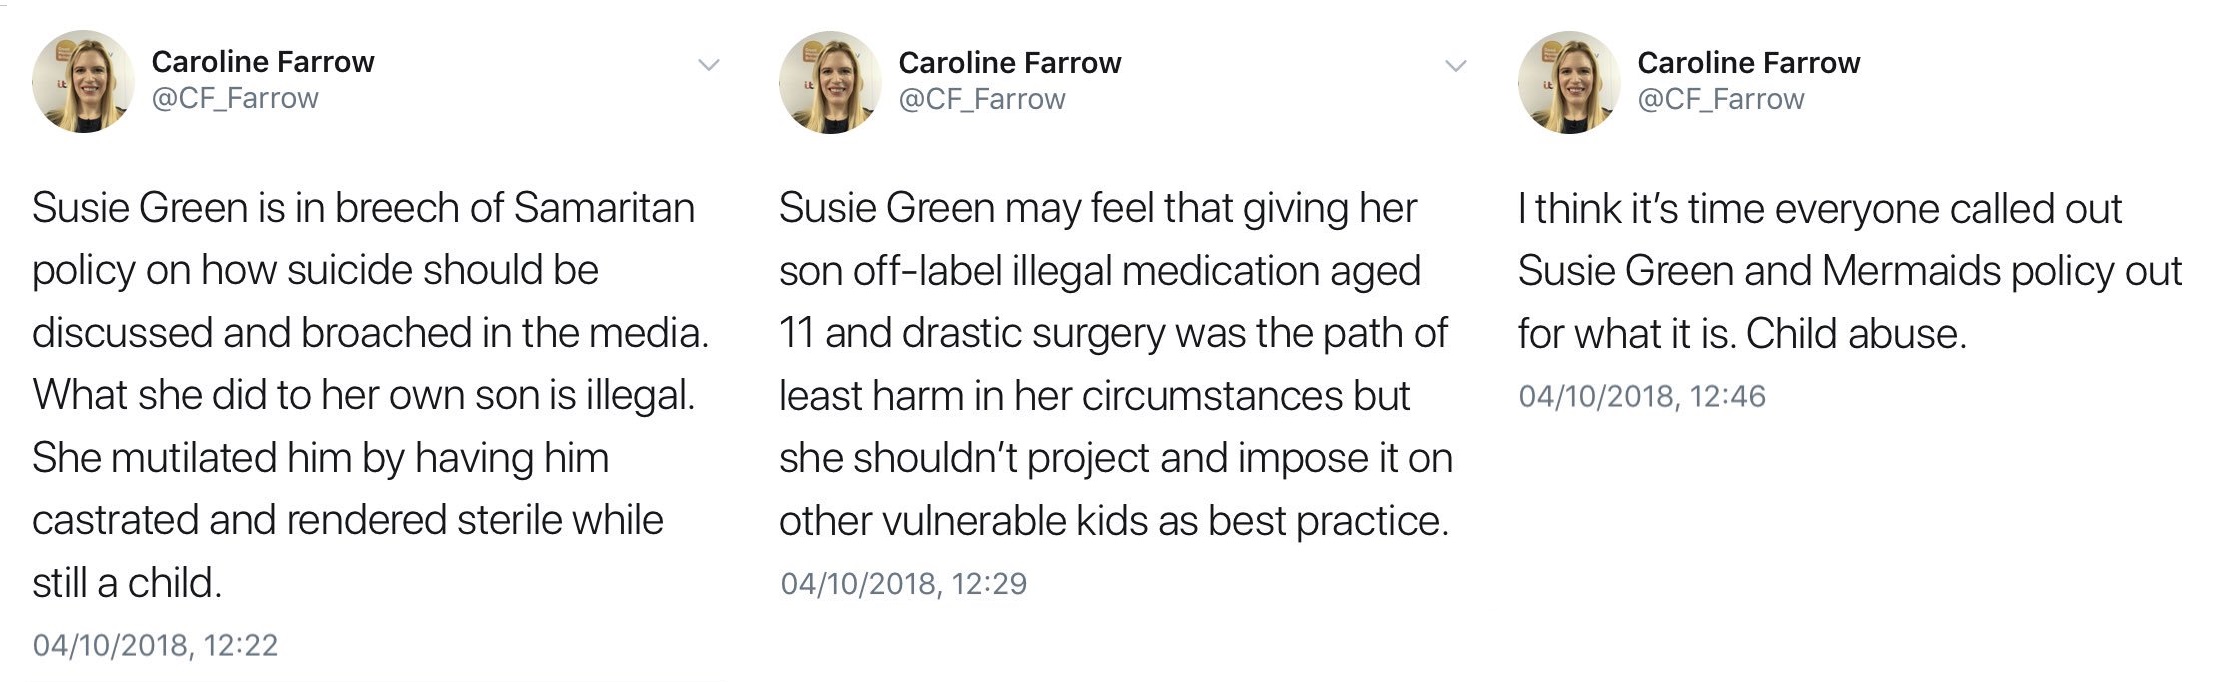 Caroline Farrow's tweets described Mermaids CEO Susie Green's work as 'child abuse' and accused her of 'mutilating' her transgender daughter. 